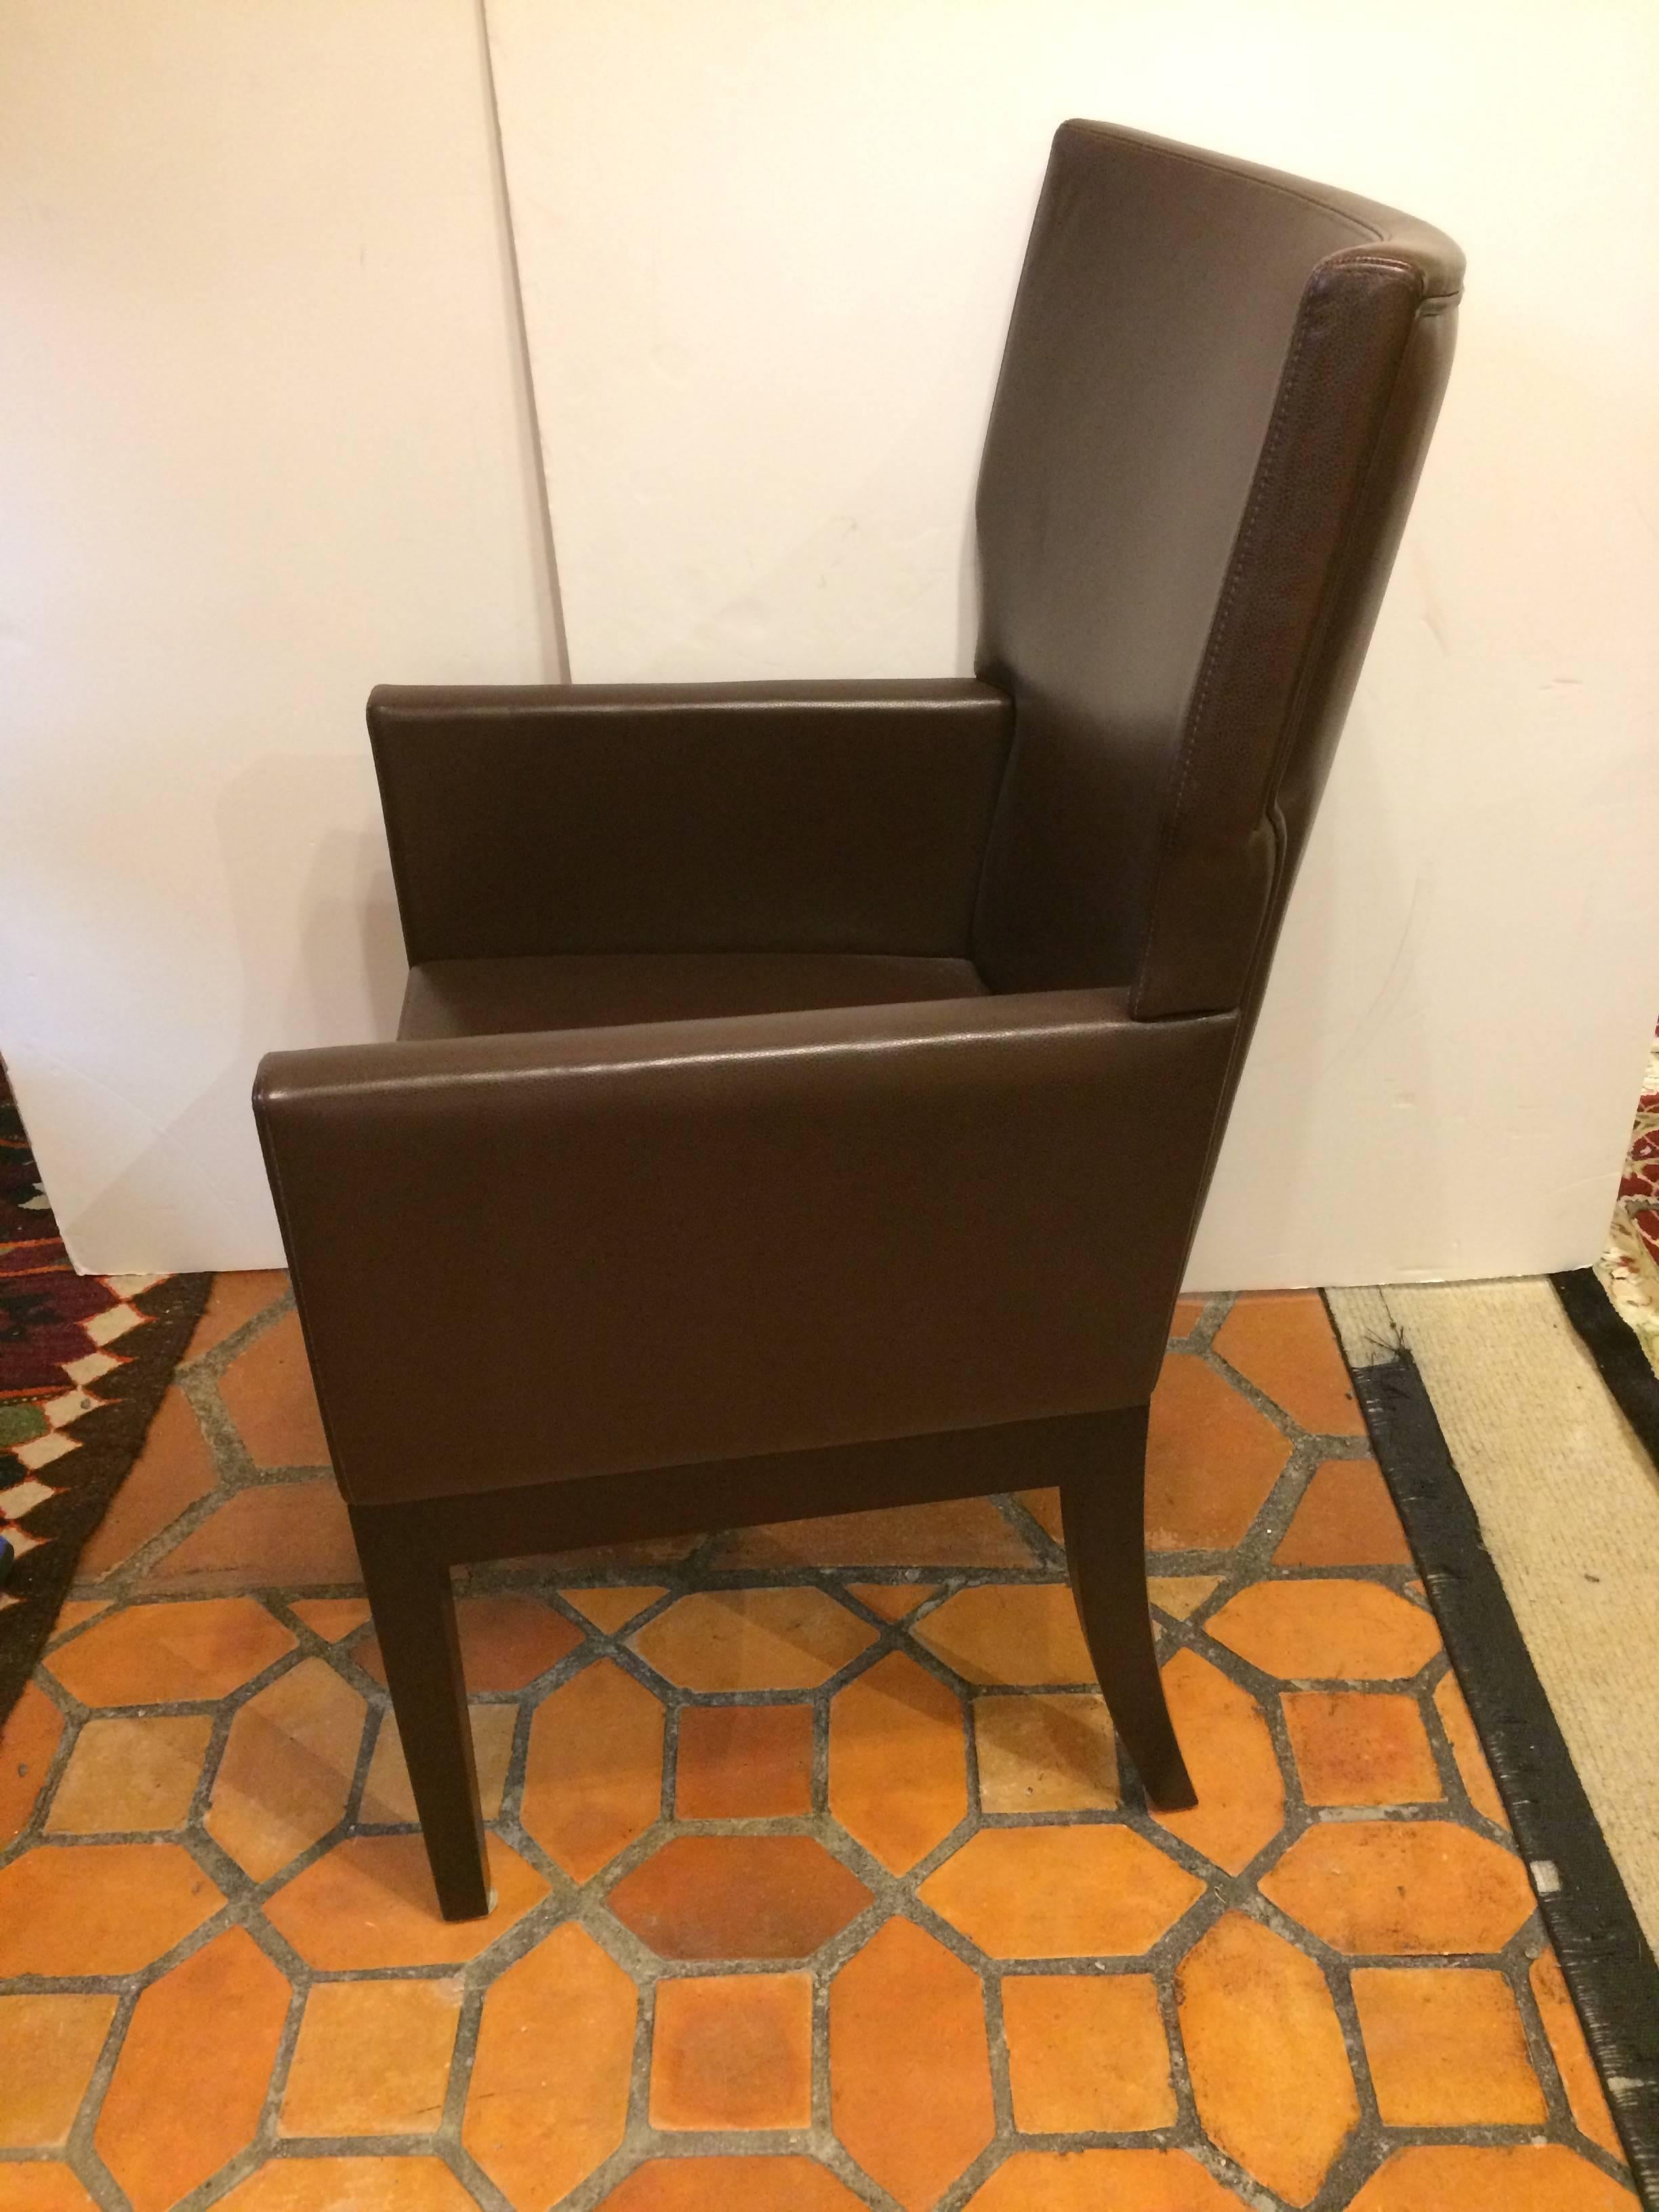 Very smart pair of high quality chocolate brown leather arm chairs having custom tapered mahogany ebonized legs. Label underside says Christian Liagre. These are available new to the trade for $7500 each. Can be used as dining chairs, club chairs or